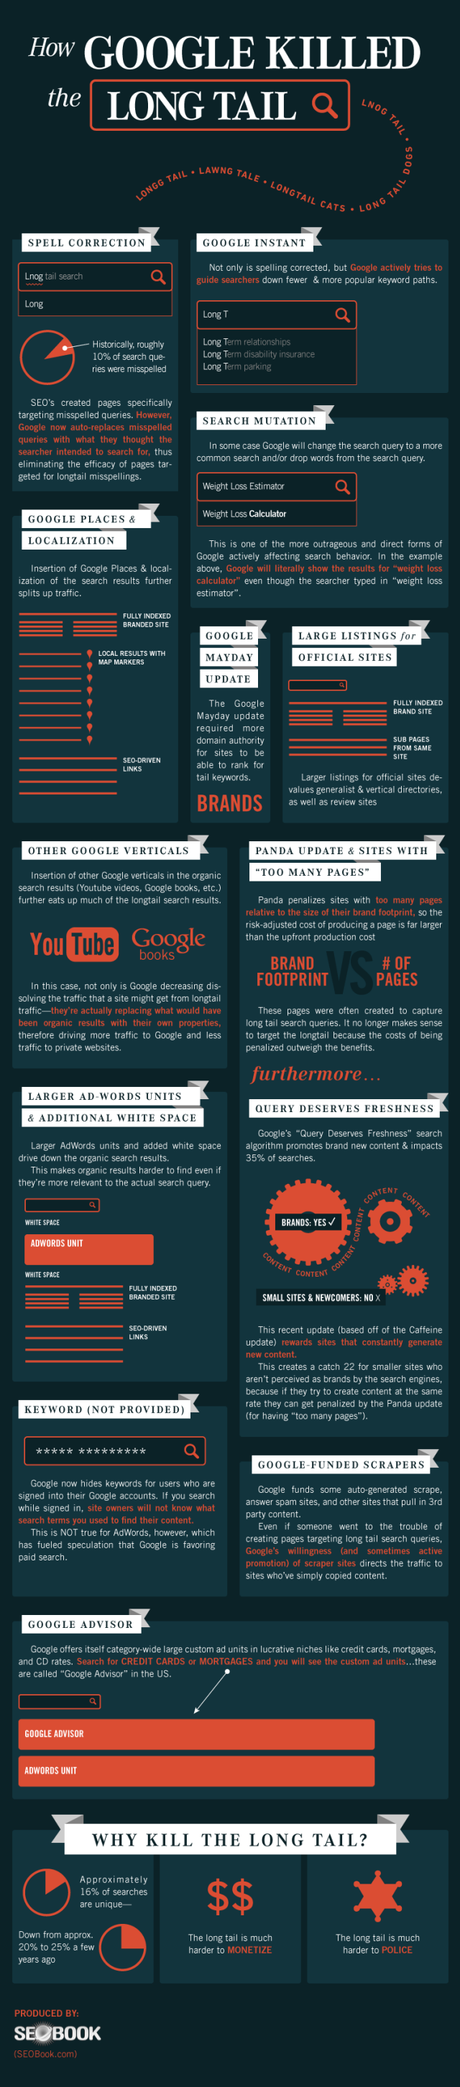 How Google Killed the Longtail Infographic.